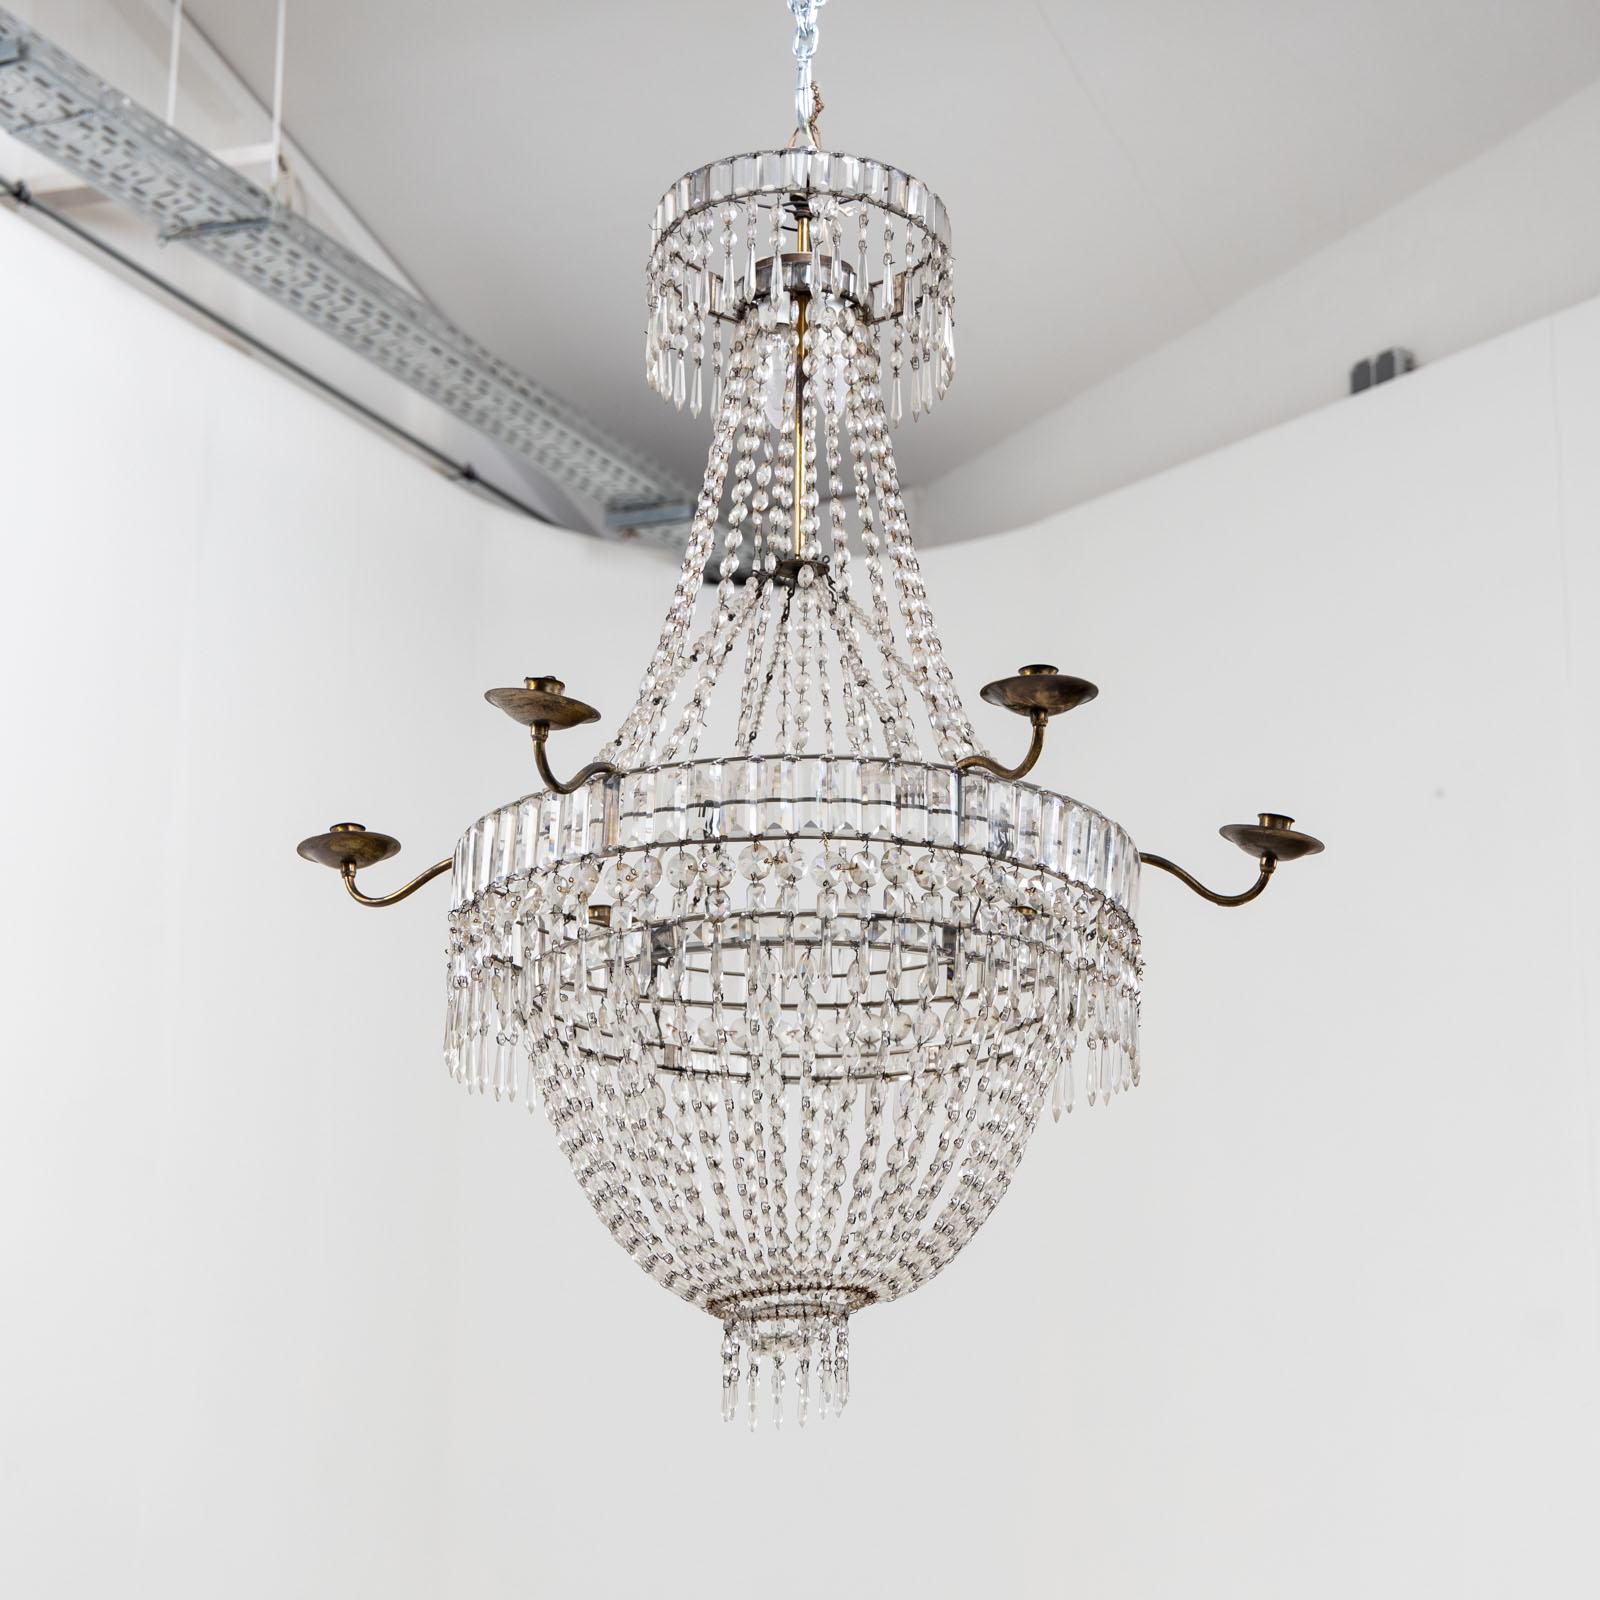 Large ceiling chandelier with six brass candle holders. The hanging of glass prisms, drops and beads is guided over two hoops and ends in a basket with hanging drops.